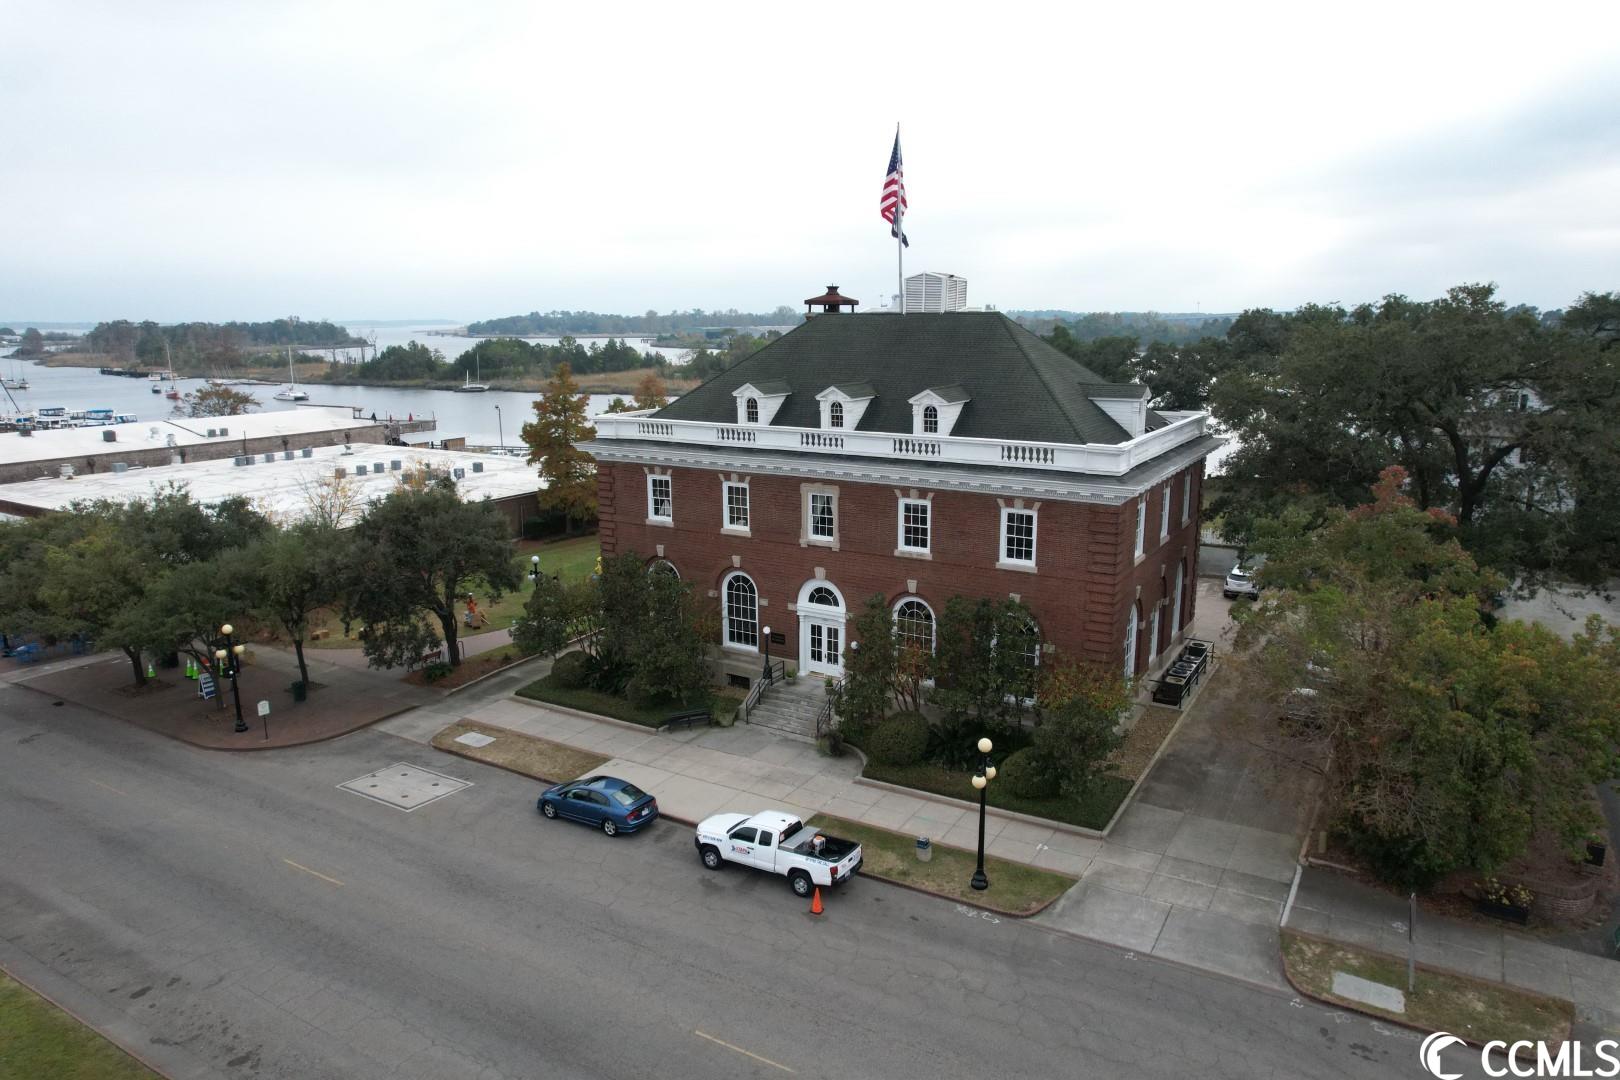 entire floor for lease. this offering includes the top floor of the historic building located at 1001 front st in georgetown, sc. the top floor features a beautiful office space with original historic architecture, storage closets, open floor plan office space, loft area, a kitchenette, and a spiral staircase that leads to a viewing post that gives views of winyah bay, front st, and parts of georgetown. this is a unique opportunity to lease a space for your business that truly makes a statement. walking distance to banks, dining, shopping, and more. square footage is approximate and not guaranteed. buyer responsible for verification.